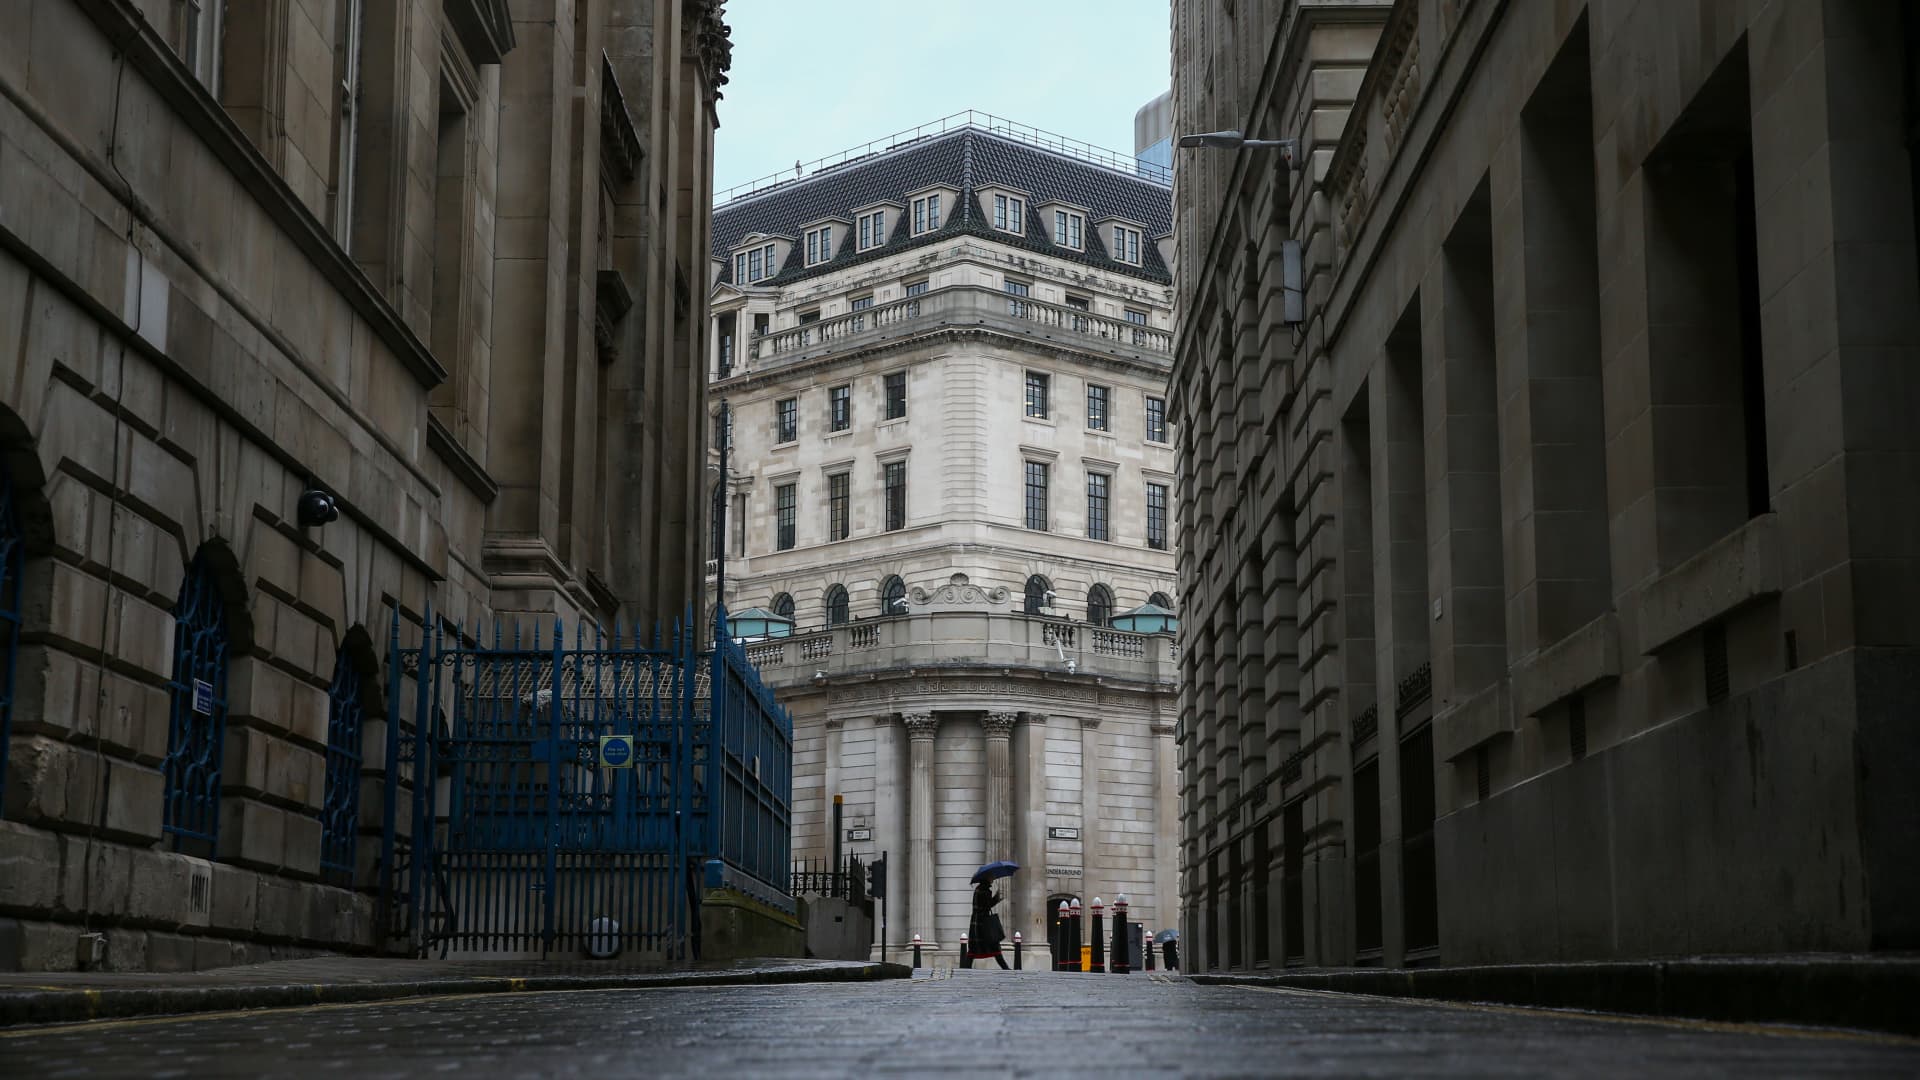 Bank of England raises rate by 75 basis points, biggest hike in 33 years